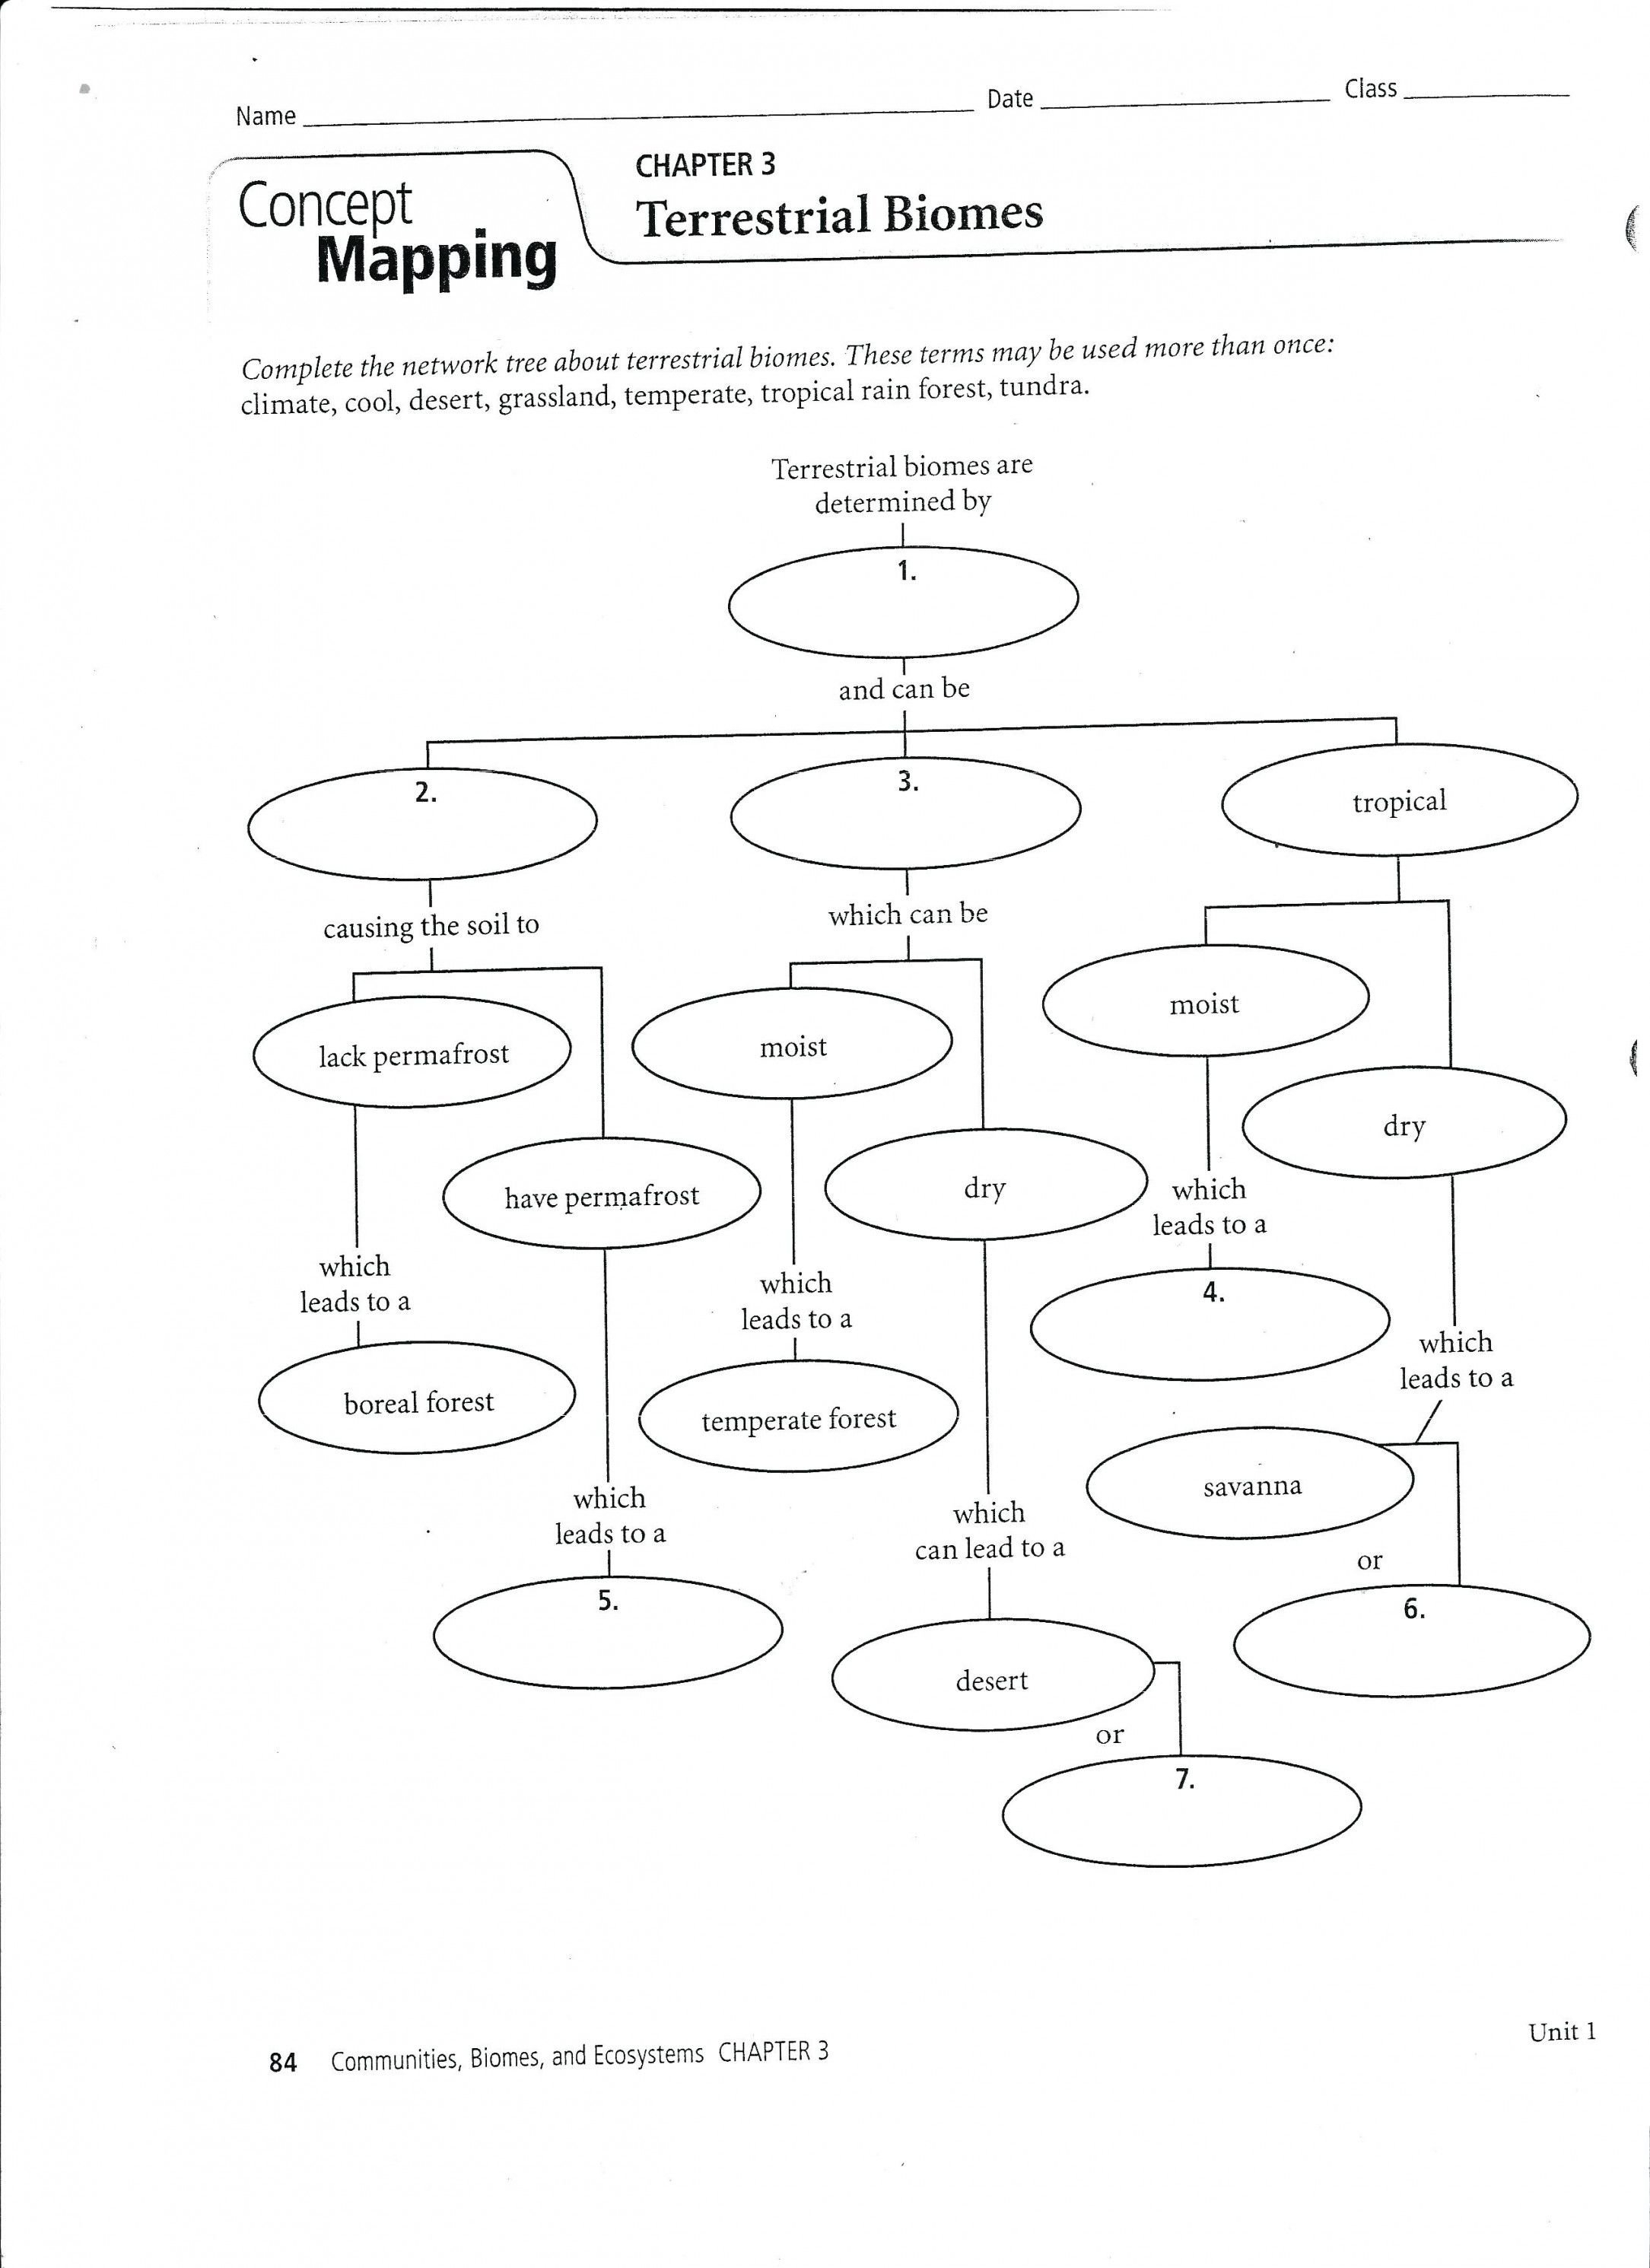 Skills Worksheet Concept Mapping  Yooob As Well As Skills Worksheet Concept Mapping Answers